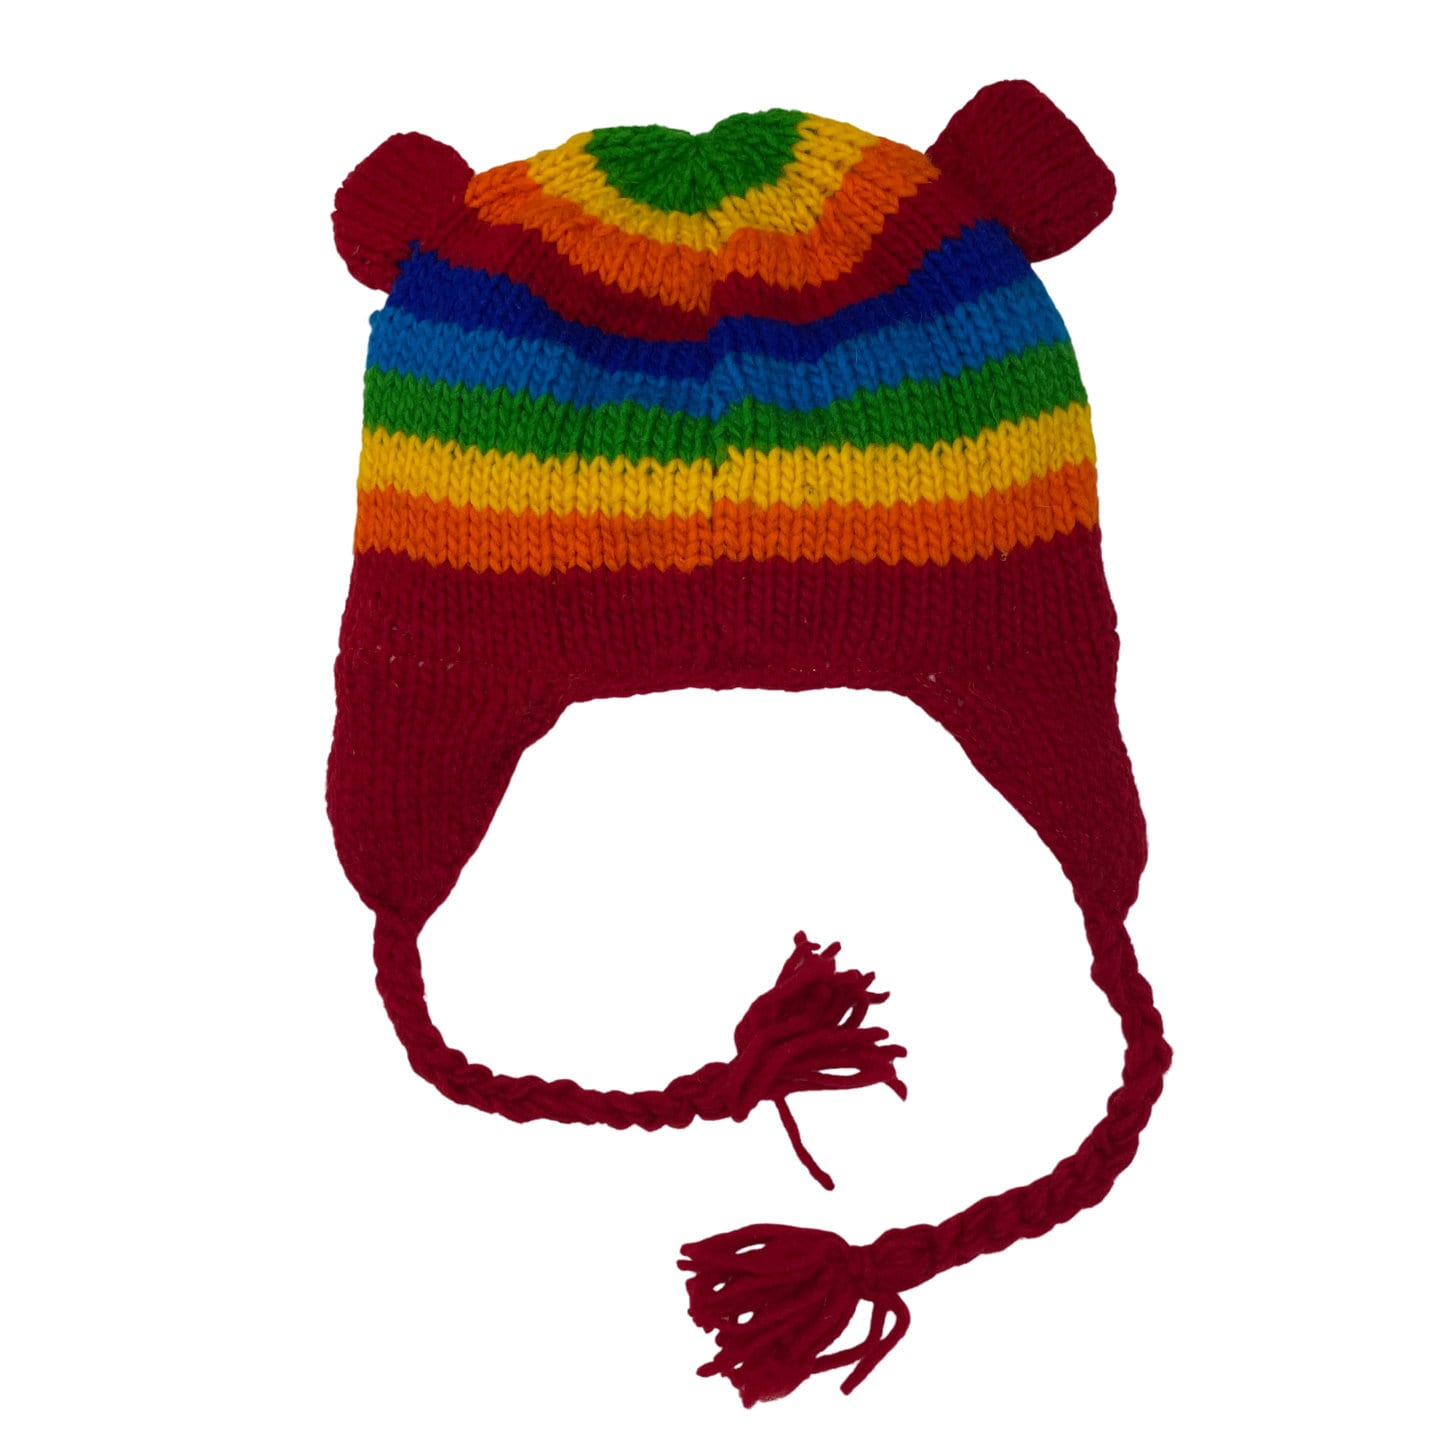 Rainbow Monkey Beanie Hat for Kids and Adults